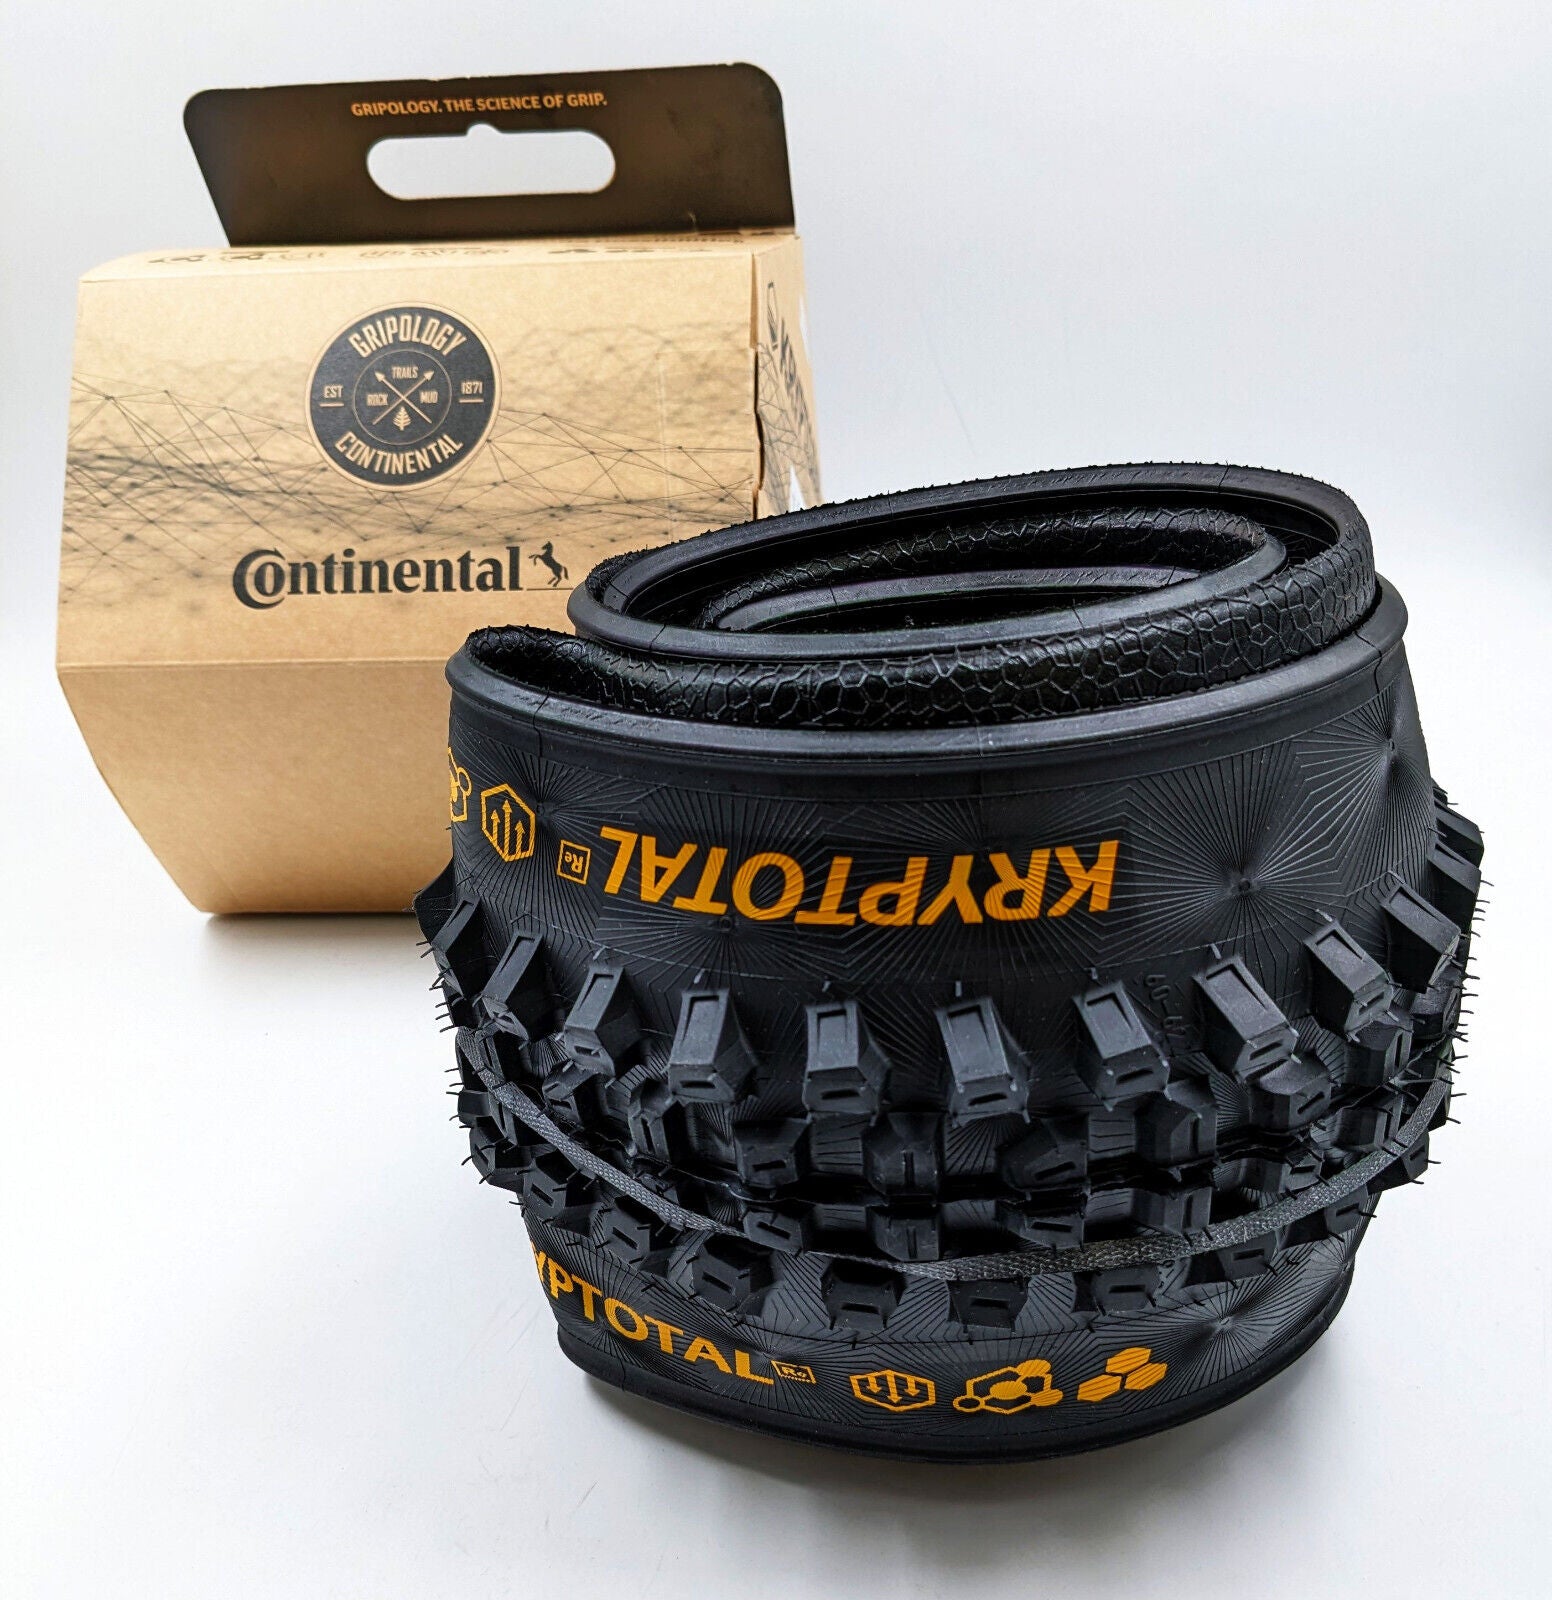 Continental Kryptotal 29x2.40 Super Soft Downhill Tubeless Tire - The Bikesmiths